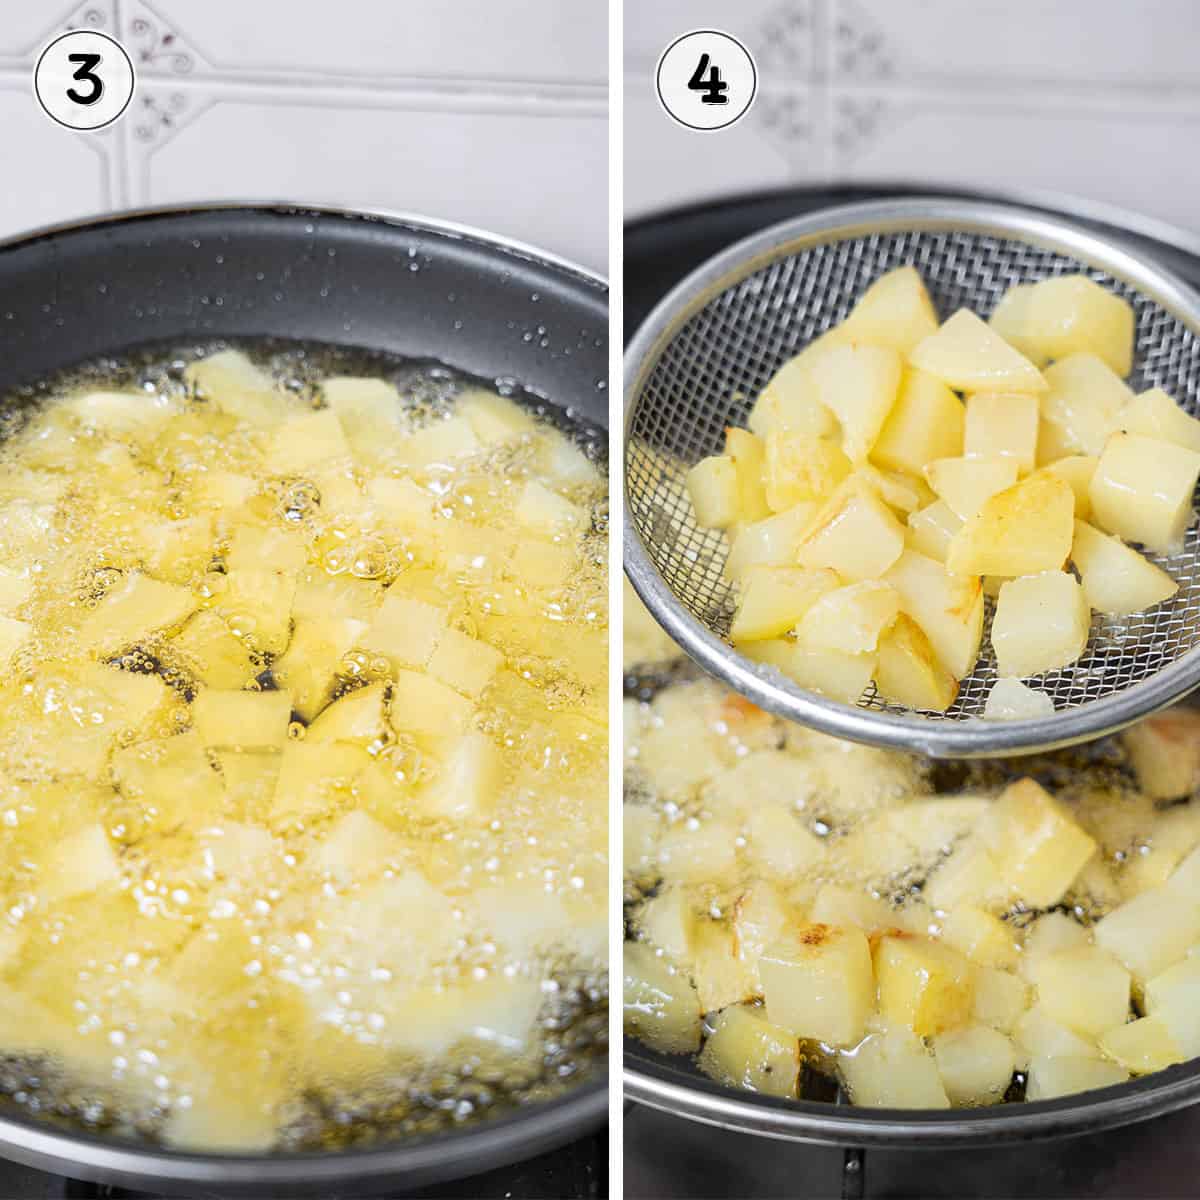 frying and draining cubed potatoes in hot oil.